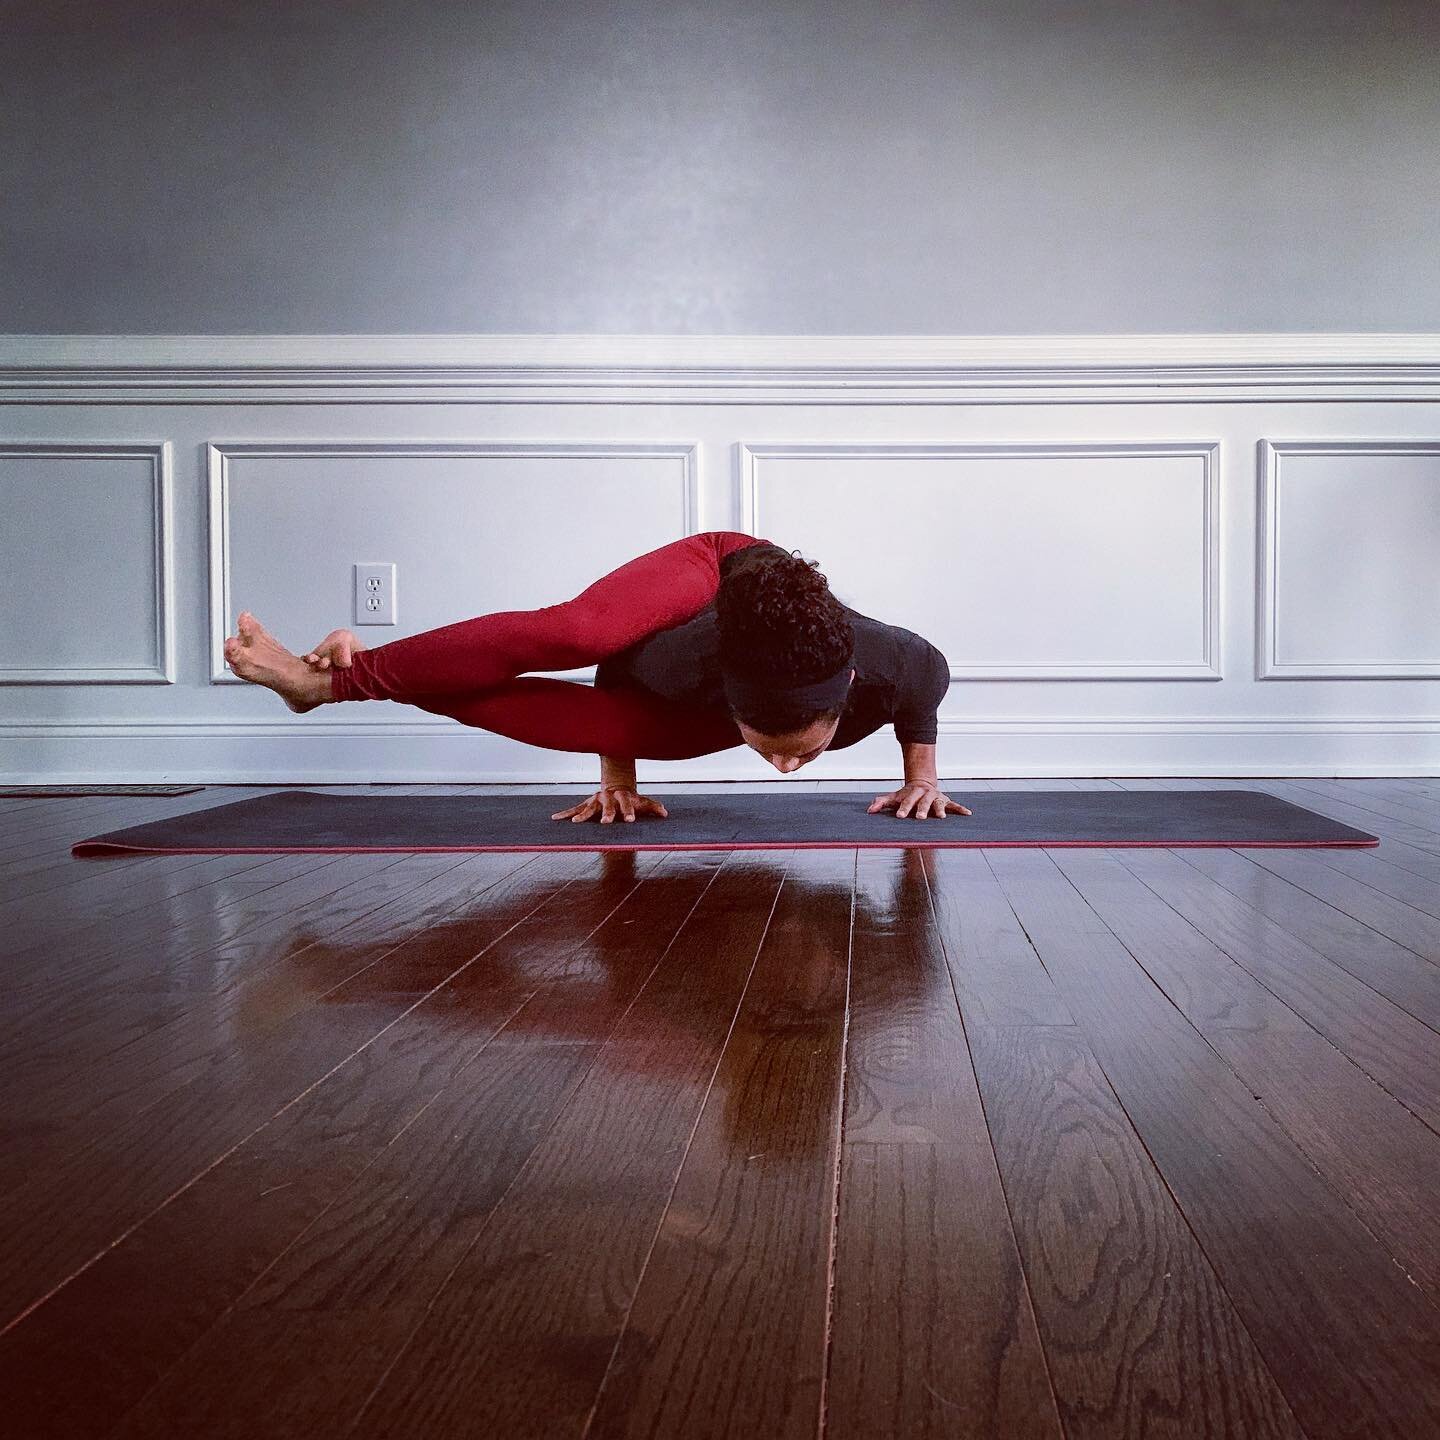 &ldquo;If you can adapt to and balance in a world that is always moving and unstable, you learn how to become tolerant to the permanence of change and difference.&rdquo; - B.K.S. Iyengar 
.
.
.
.
.
#yoga #yogapractice #yogaeverydamnday #yogalove #yog